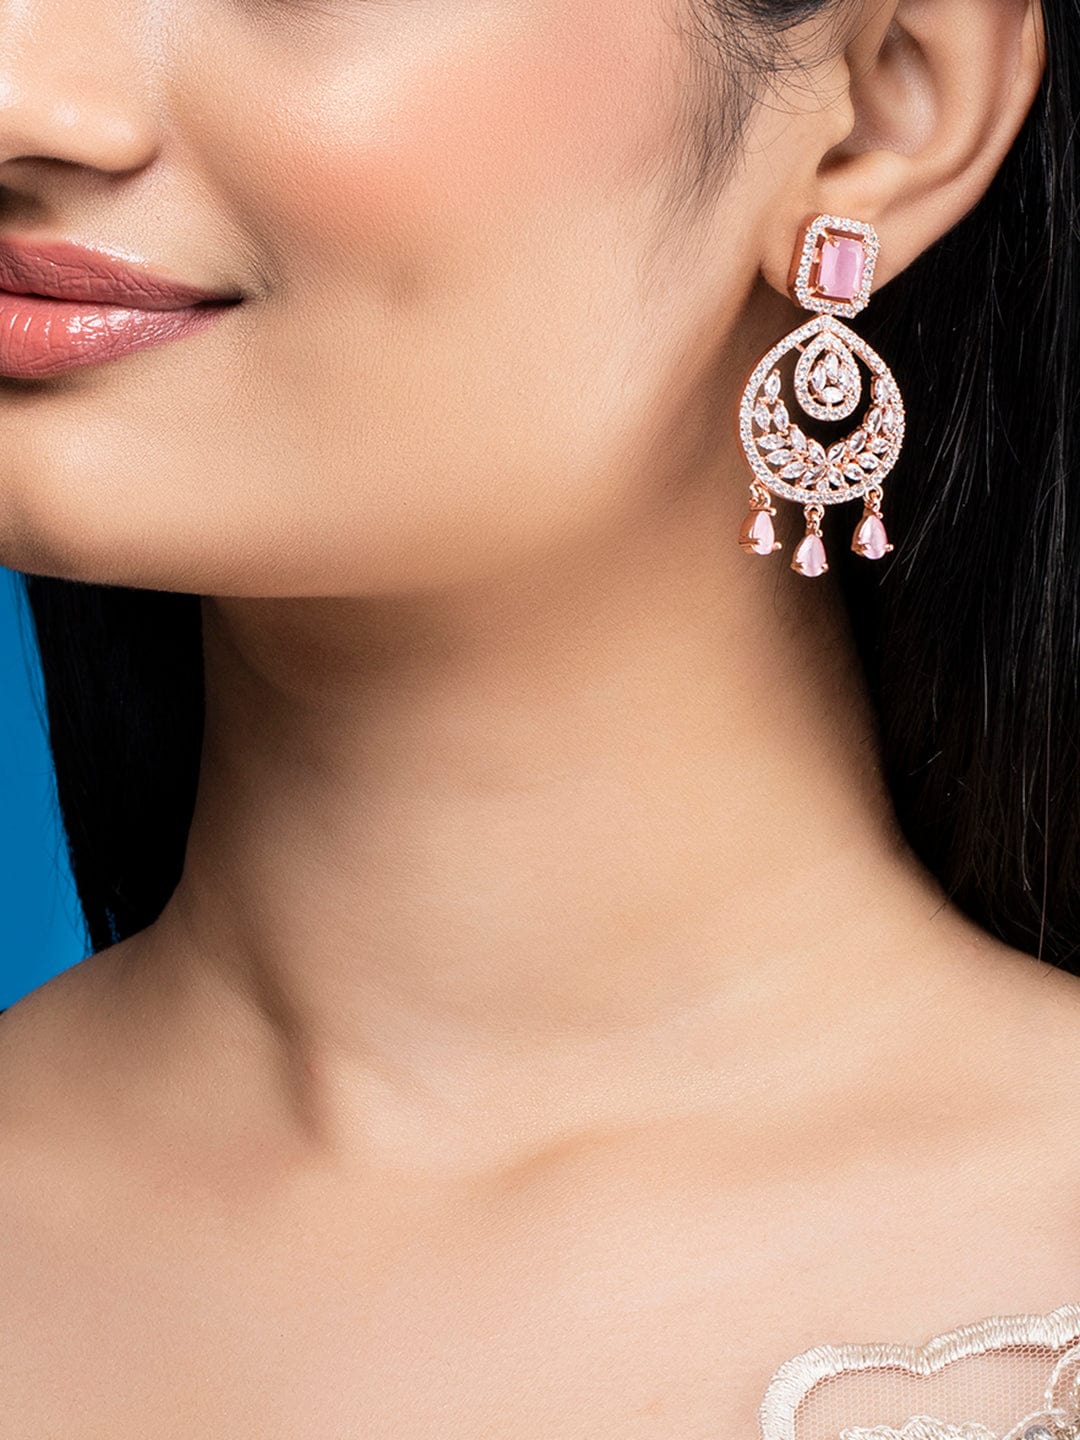 Rubans Rose Gold Plated Handcrafted AD Studded Pink Color Drop Earrings. Earrings